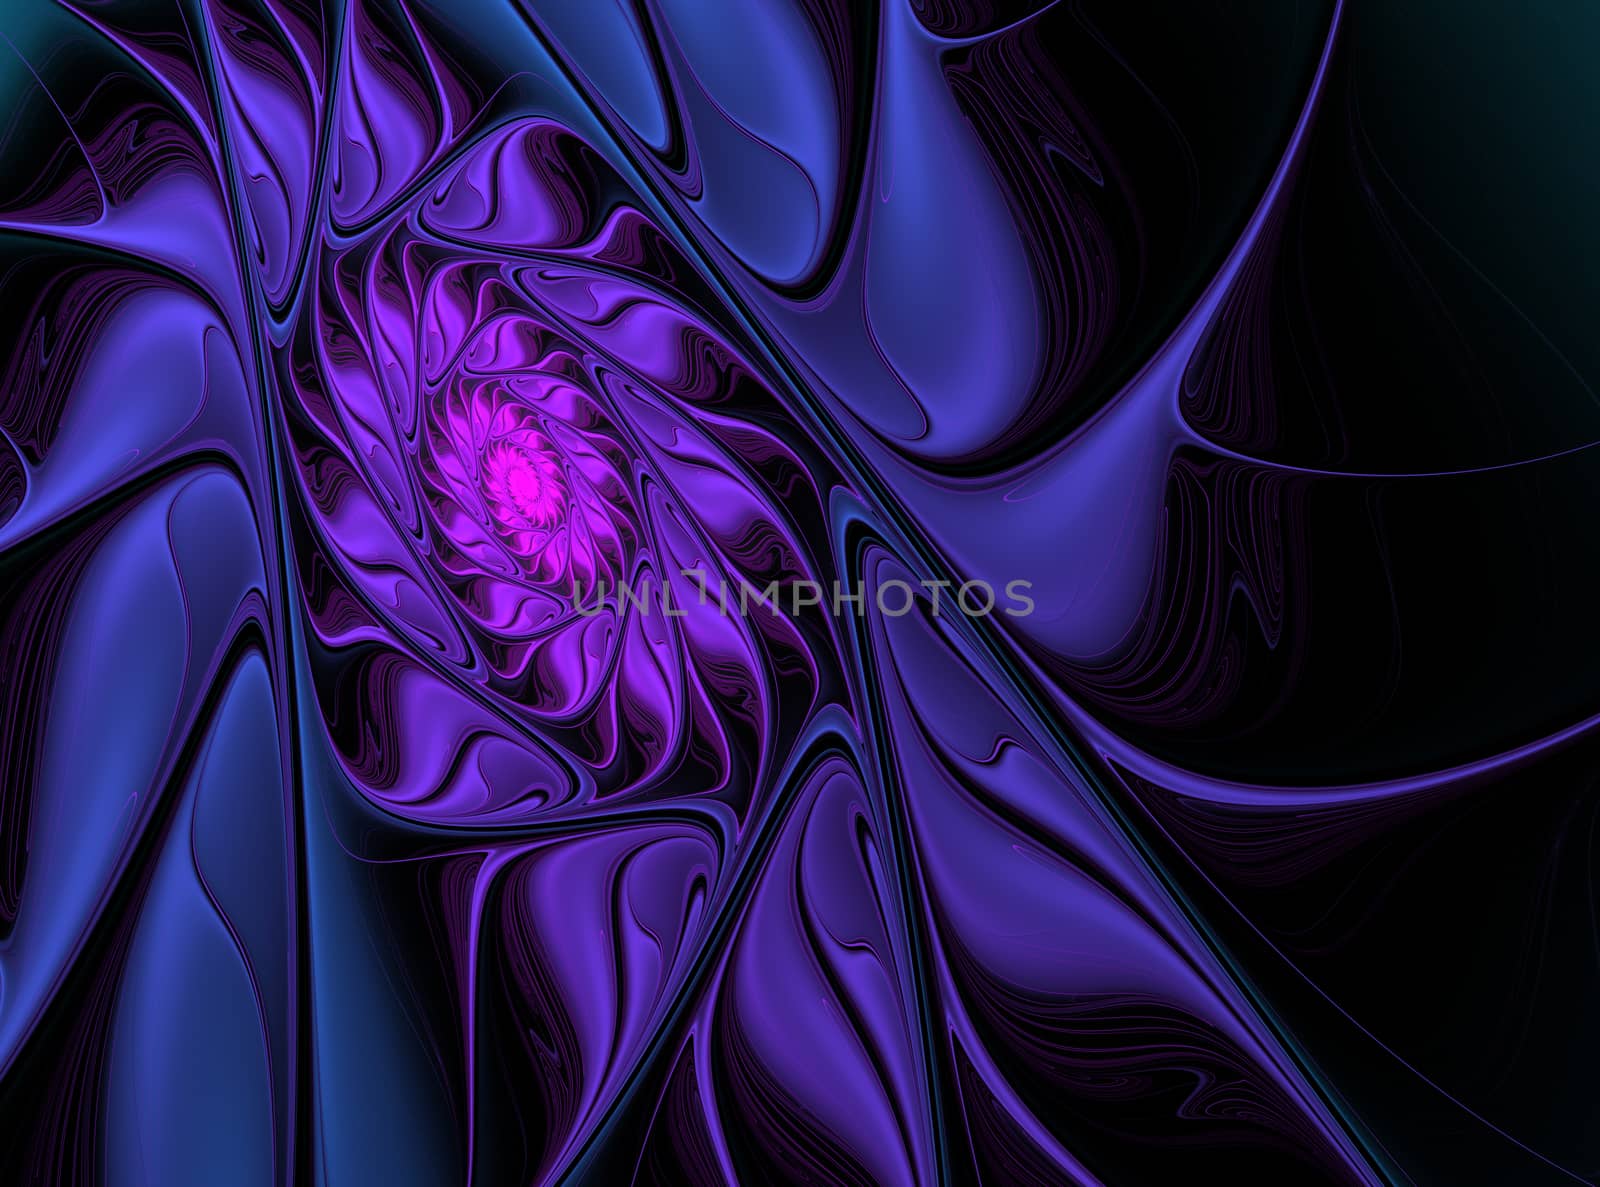 An abstract computer generated modern fractal design on dark background. Abstract fractal color texture. Digital art. Abstract Form & Colors. Blue twisted spiral flower